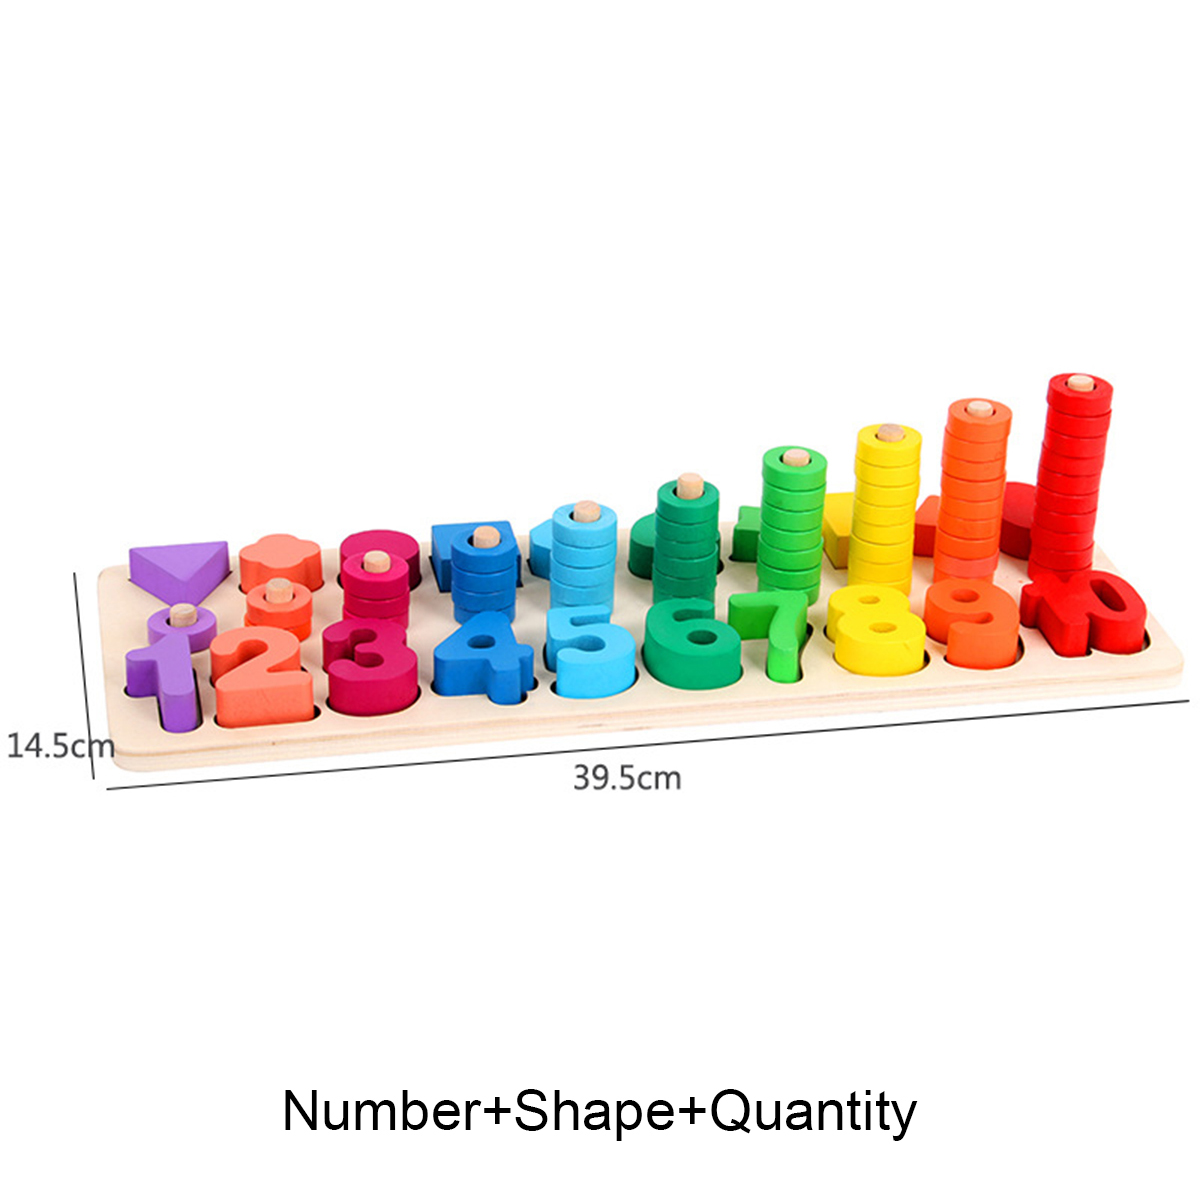 Children-Wooden-Montessori-Materials-Learning-To-Count-Numbers-Matching-Digital-Shape-Match-Early-Ed-1605437-8